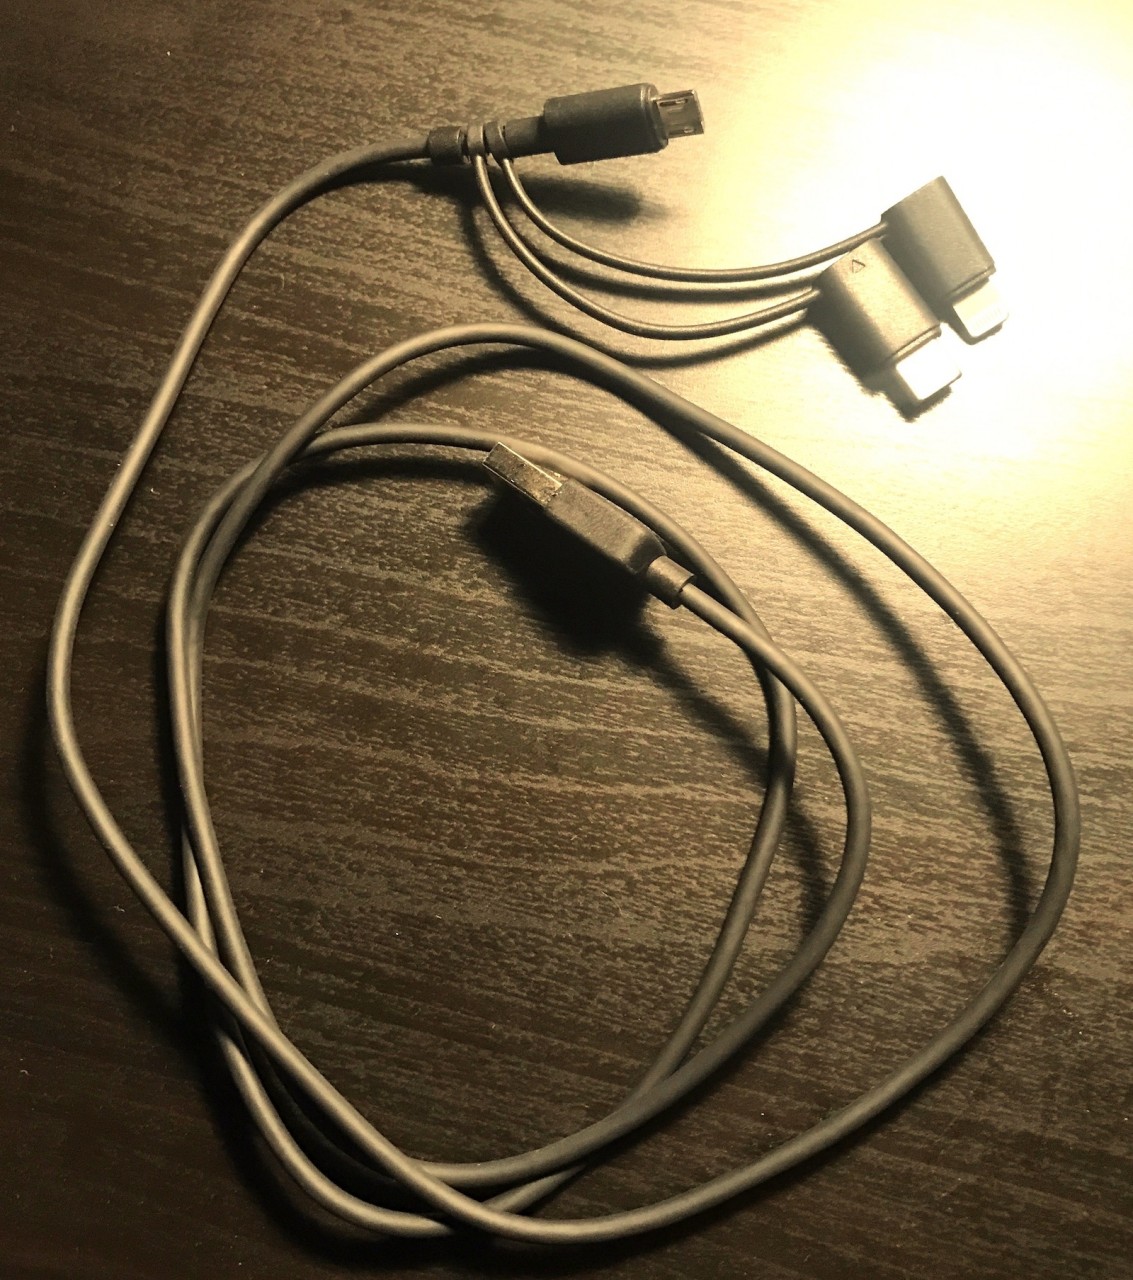 Dodocool best tripple charging cable